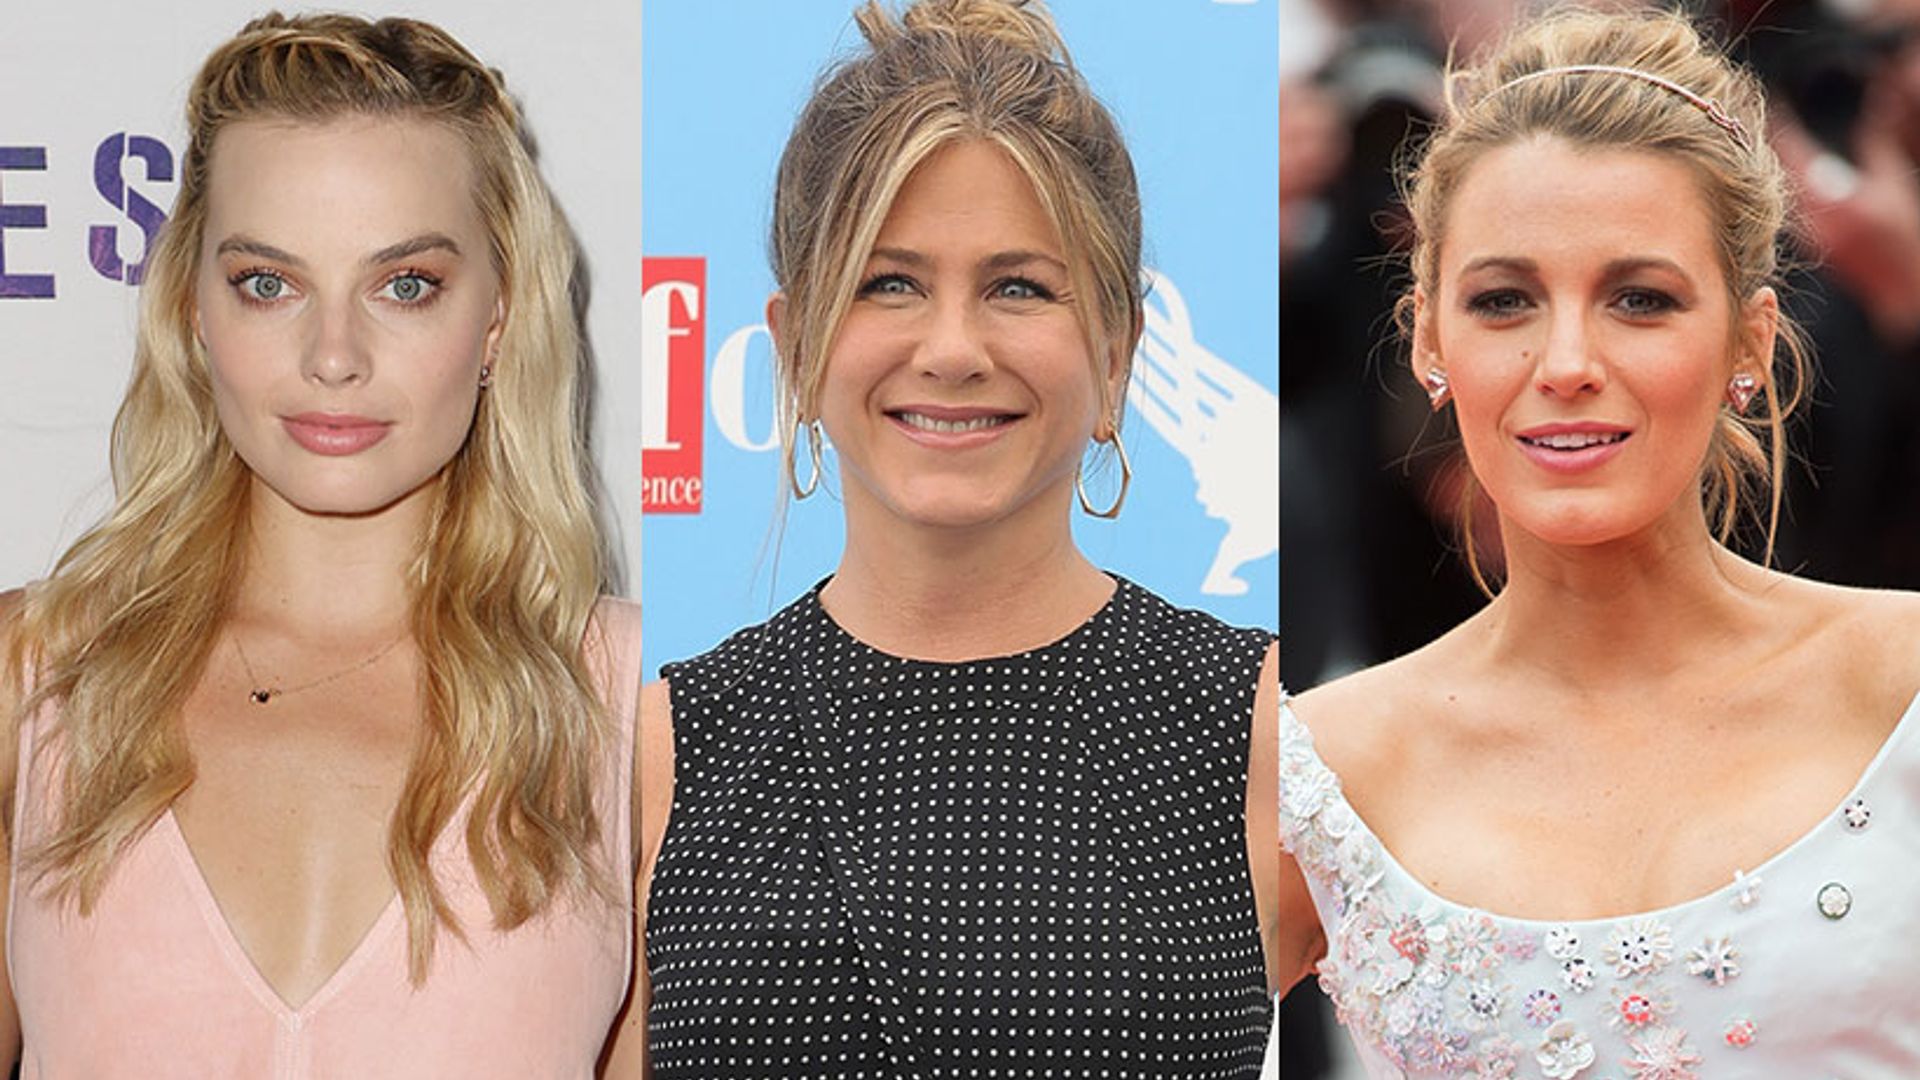 Celebrity-inspired hairstyles that are ideal if you're growing out your fringe